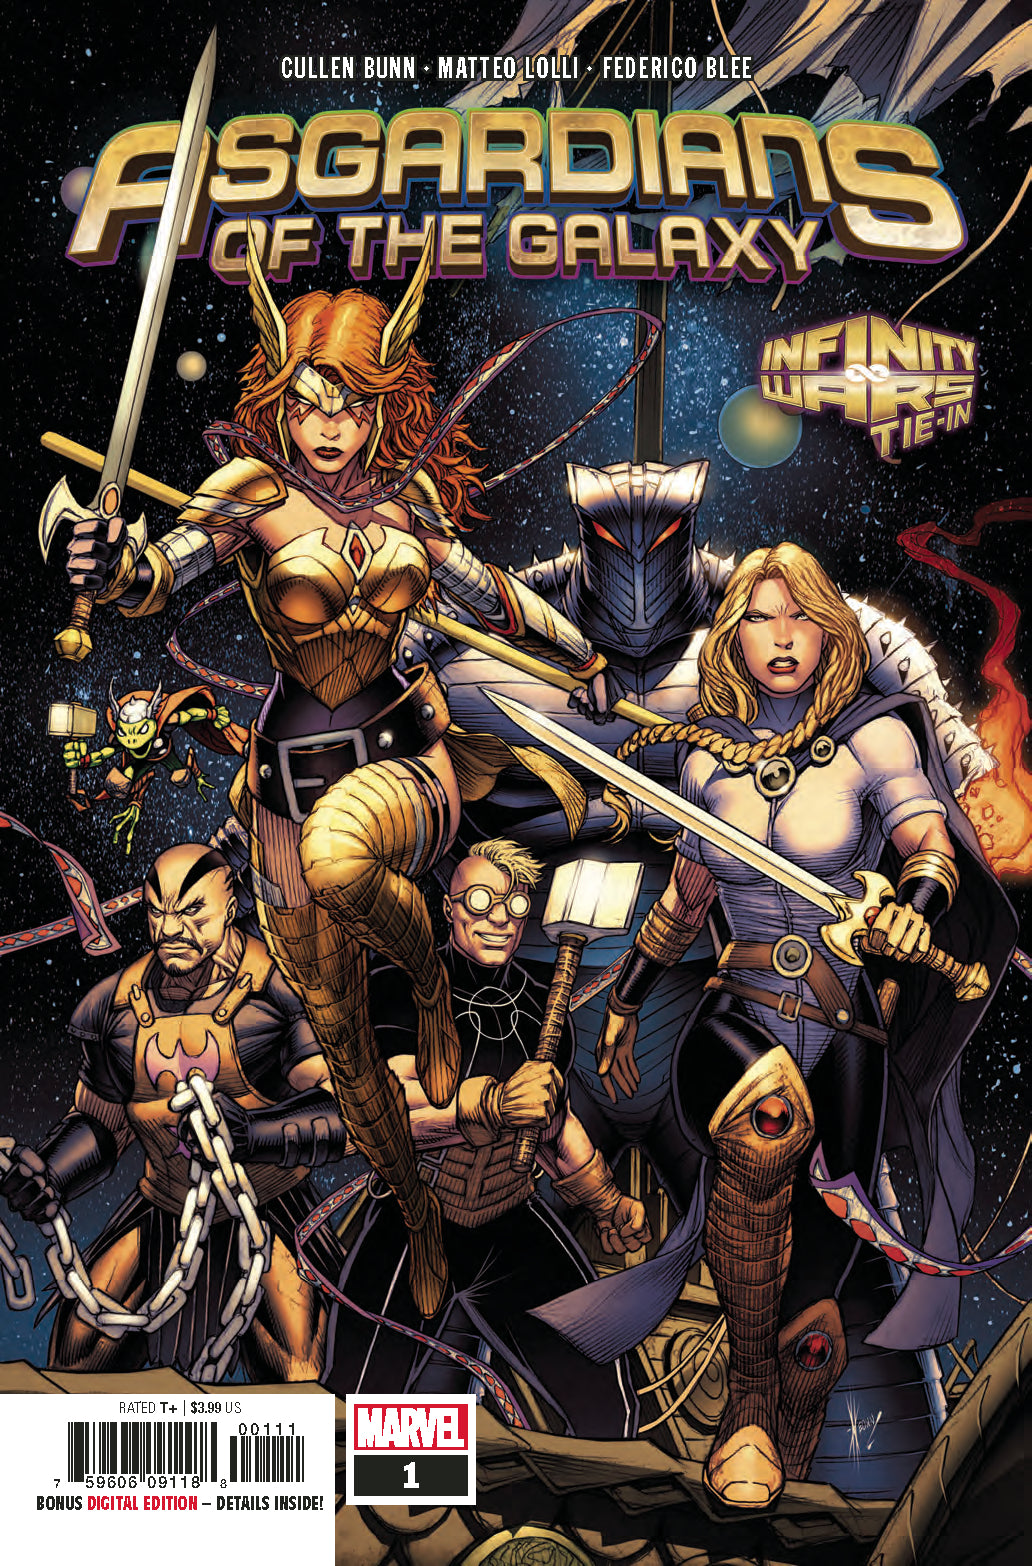 ASGARDIANS OF THE GALAXY #1 COVER